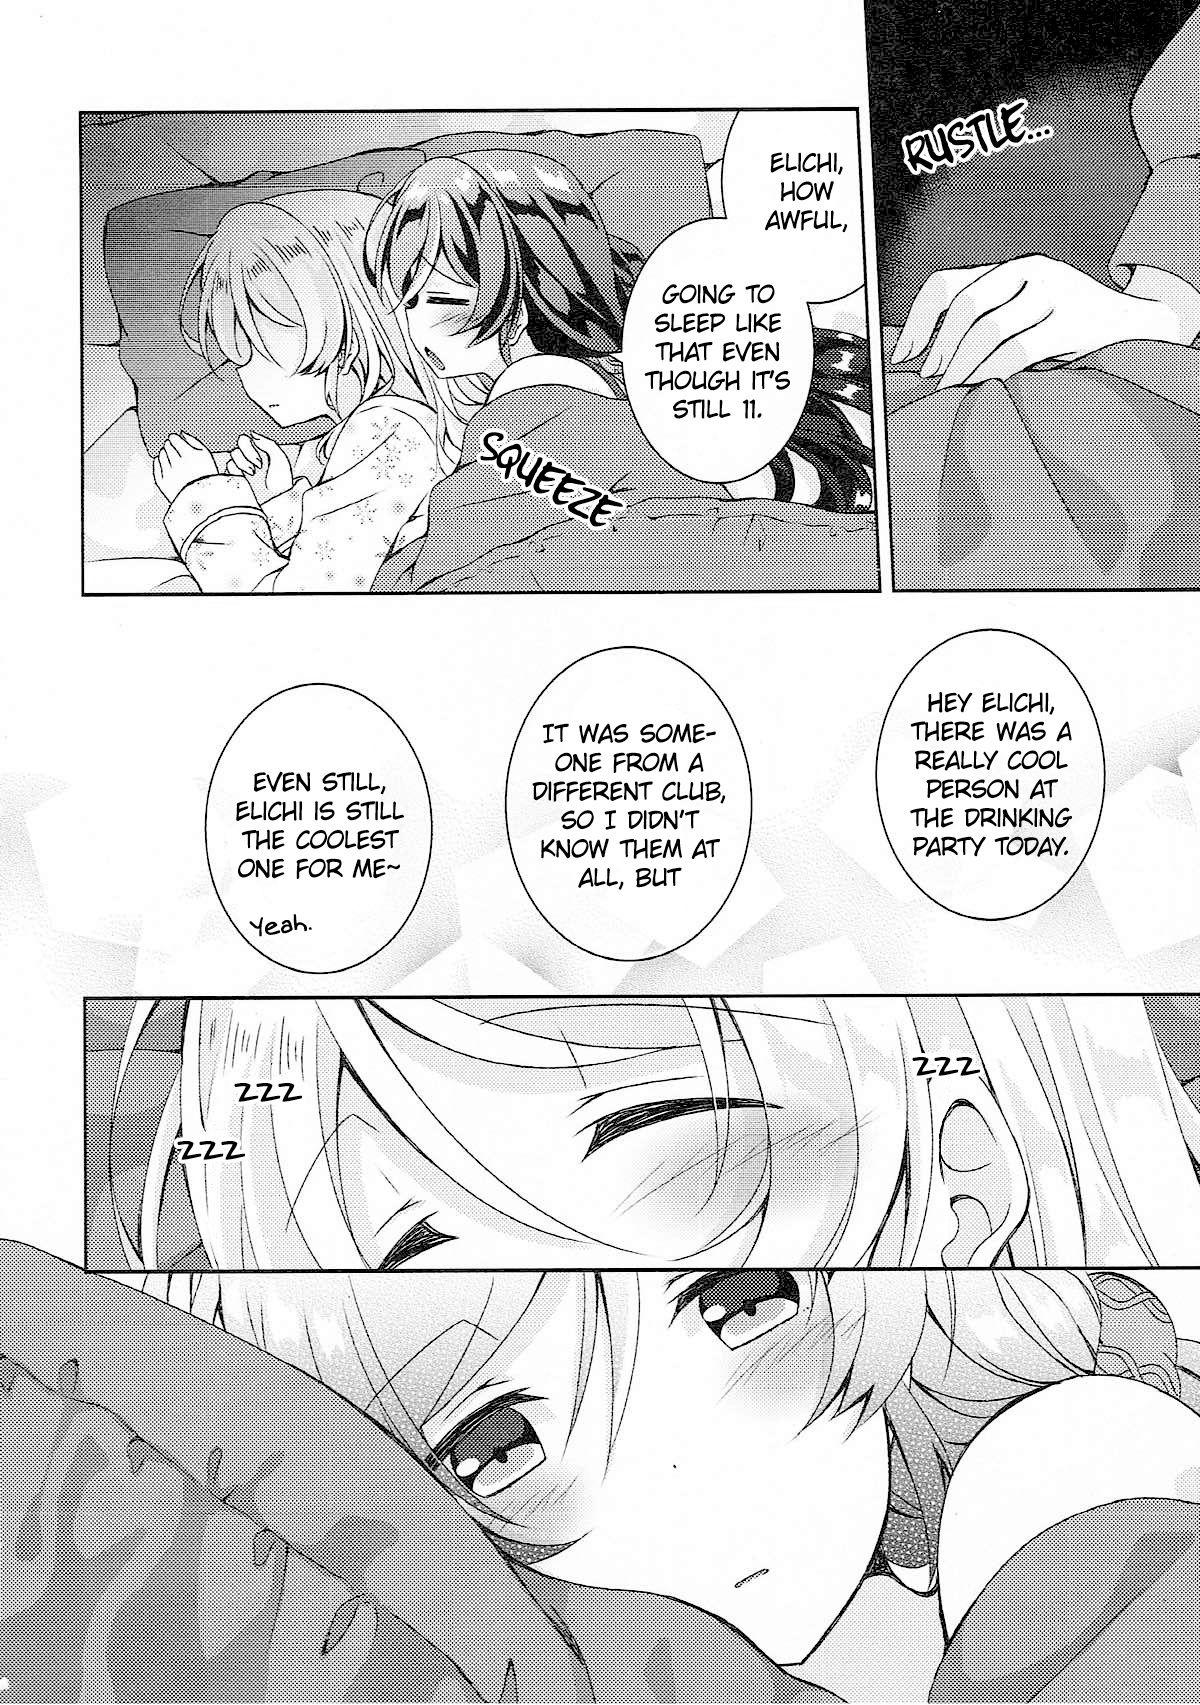 Amateur Sex Sex to Uso to Yurikago to | Sex, Pretend, and Cradle - Love live Gay Boyporn - Page 3